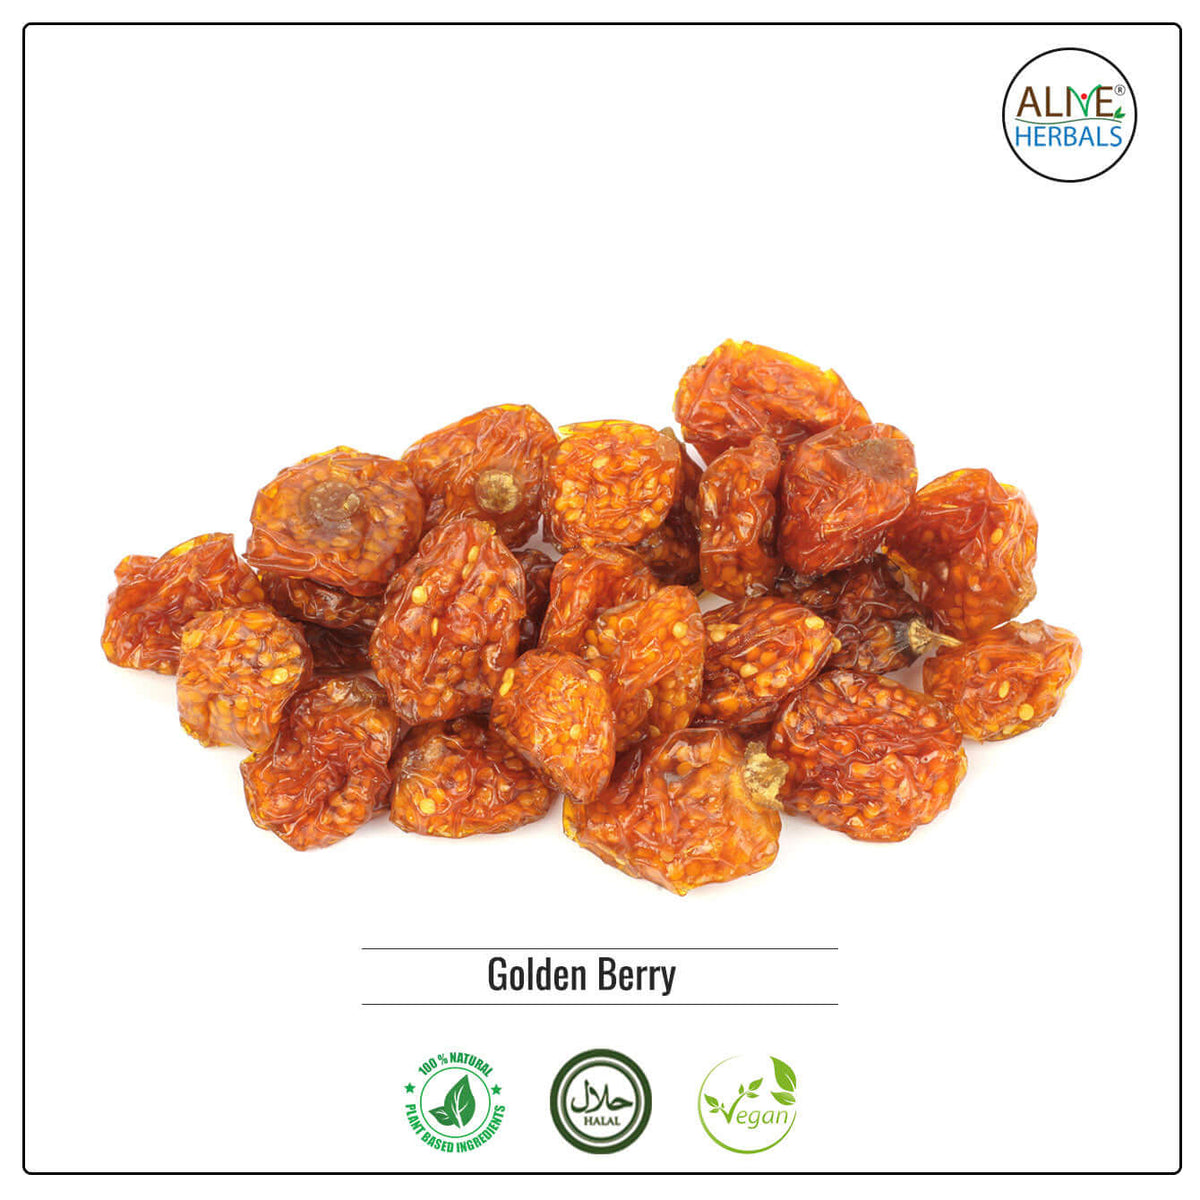 Dried Goldenberry- Buy at Natural Food Store | Alive Herbals.